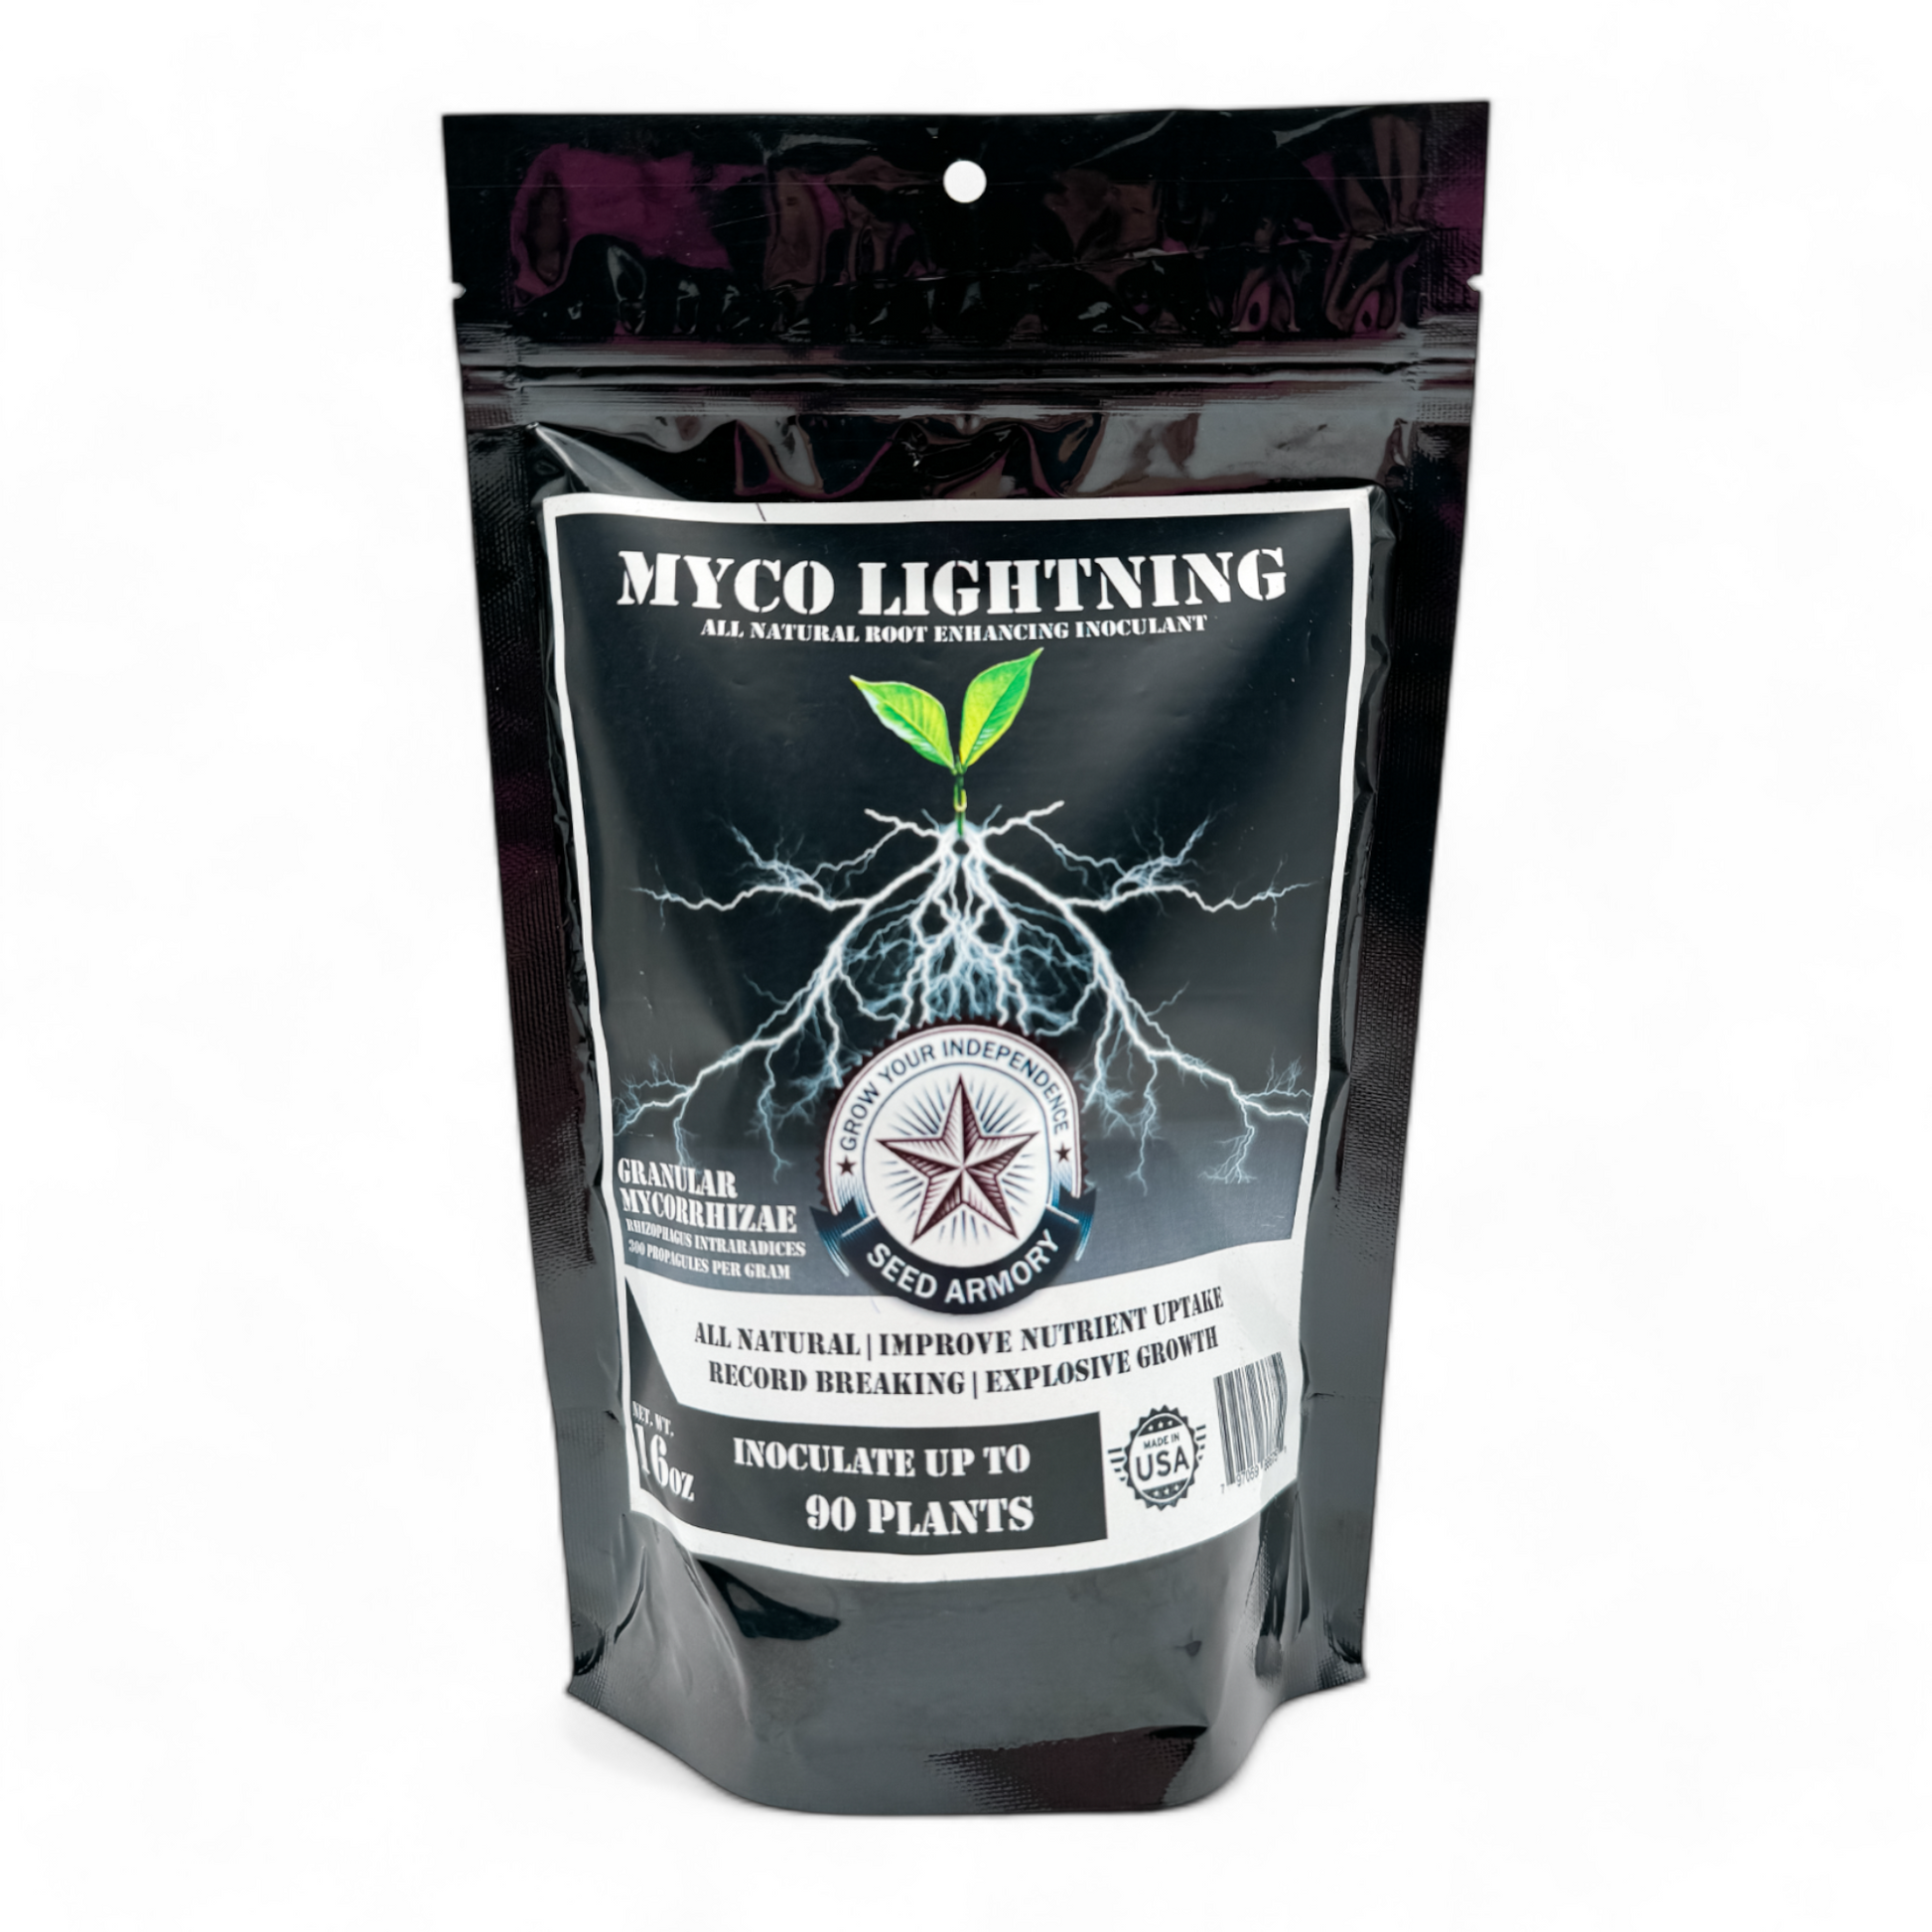 Front packet view of Myco Lightning soil amendment product label